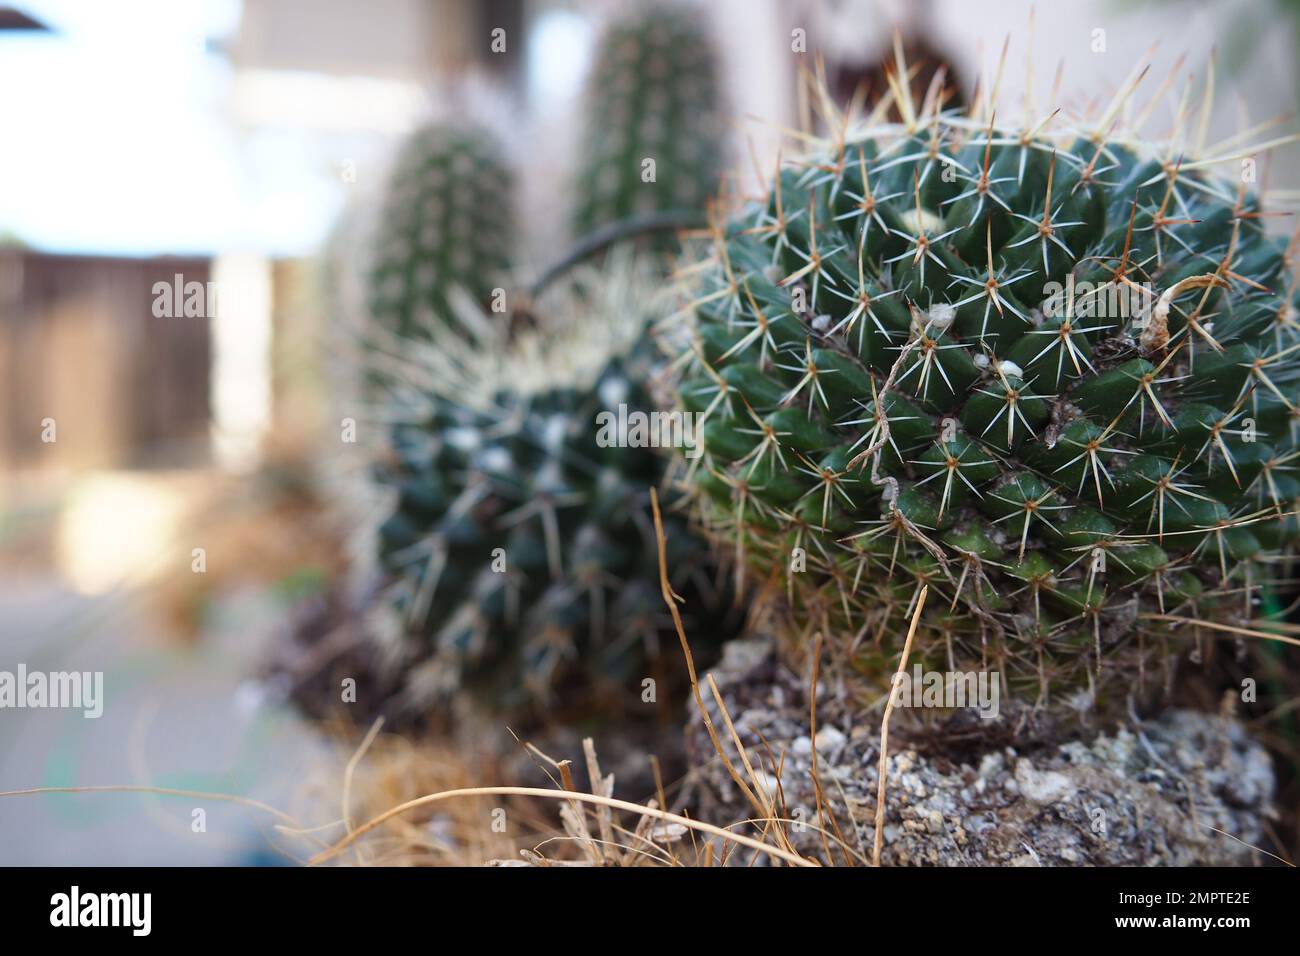 Shallow depth of field shot of a small spiked cactus Stock Photo